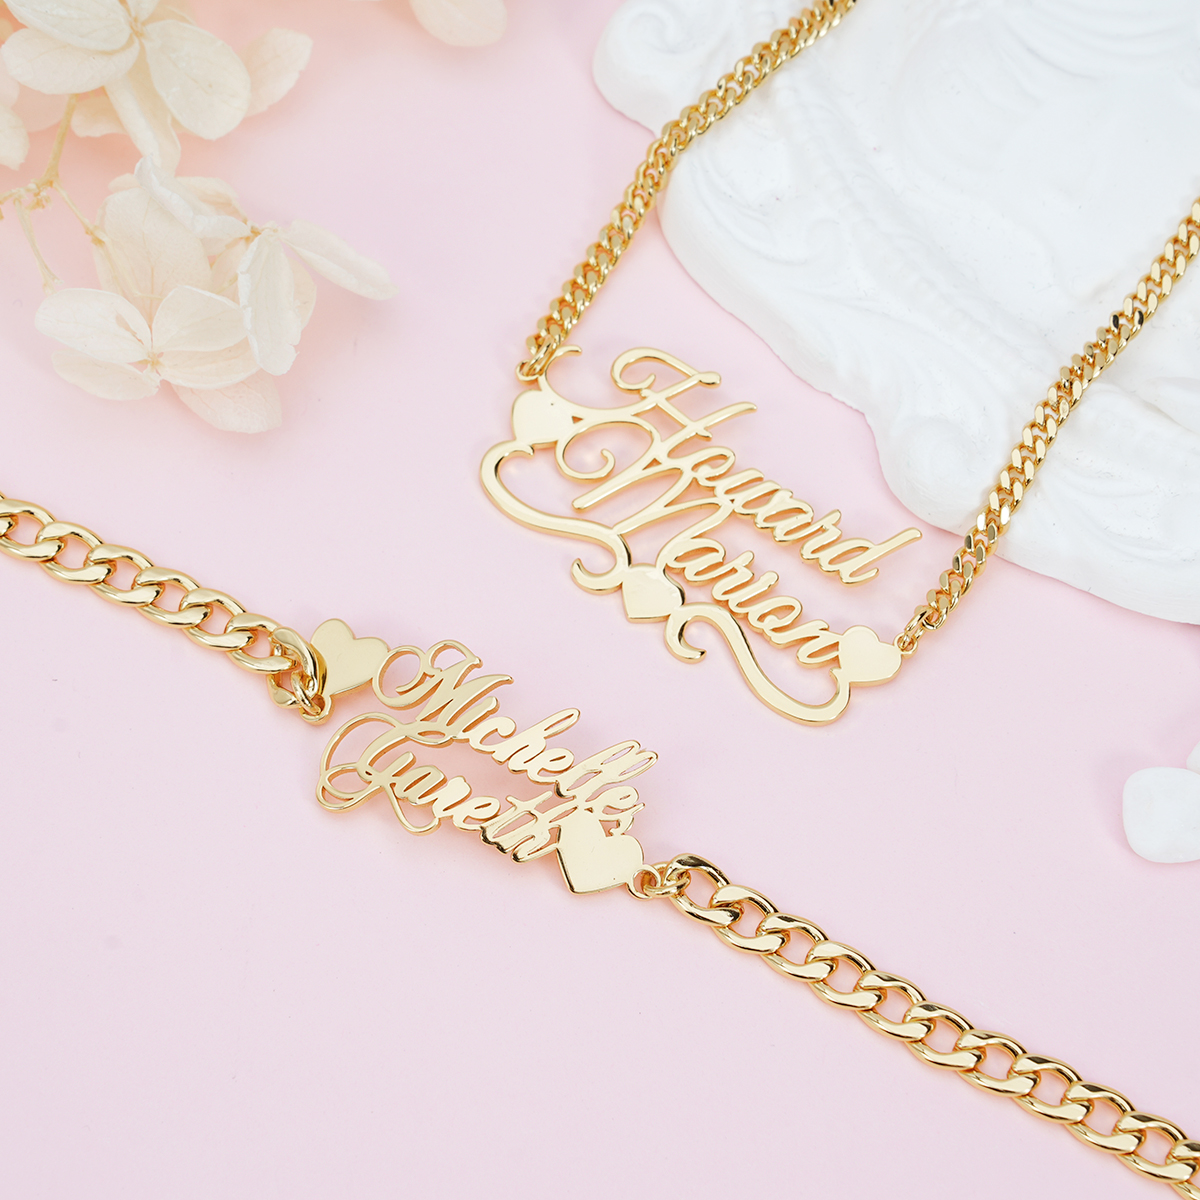 Personalized Cuban Chain Heart Name Necklace And Name Bracelet Jewelry Set 2pcs Gift For Love